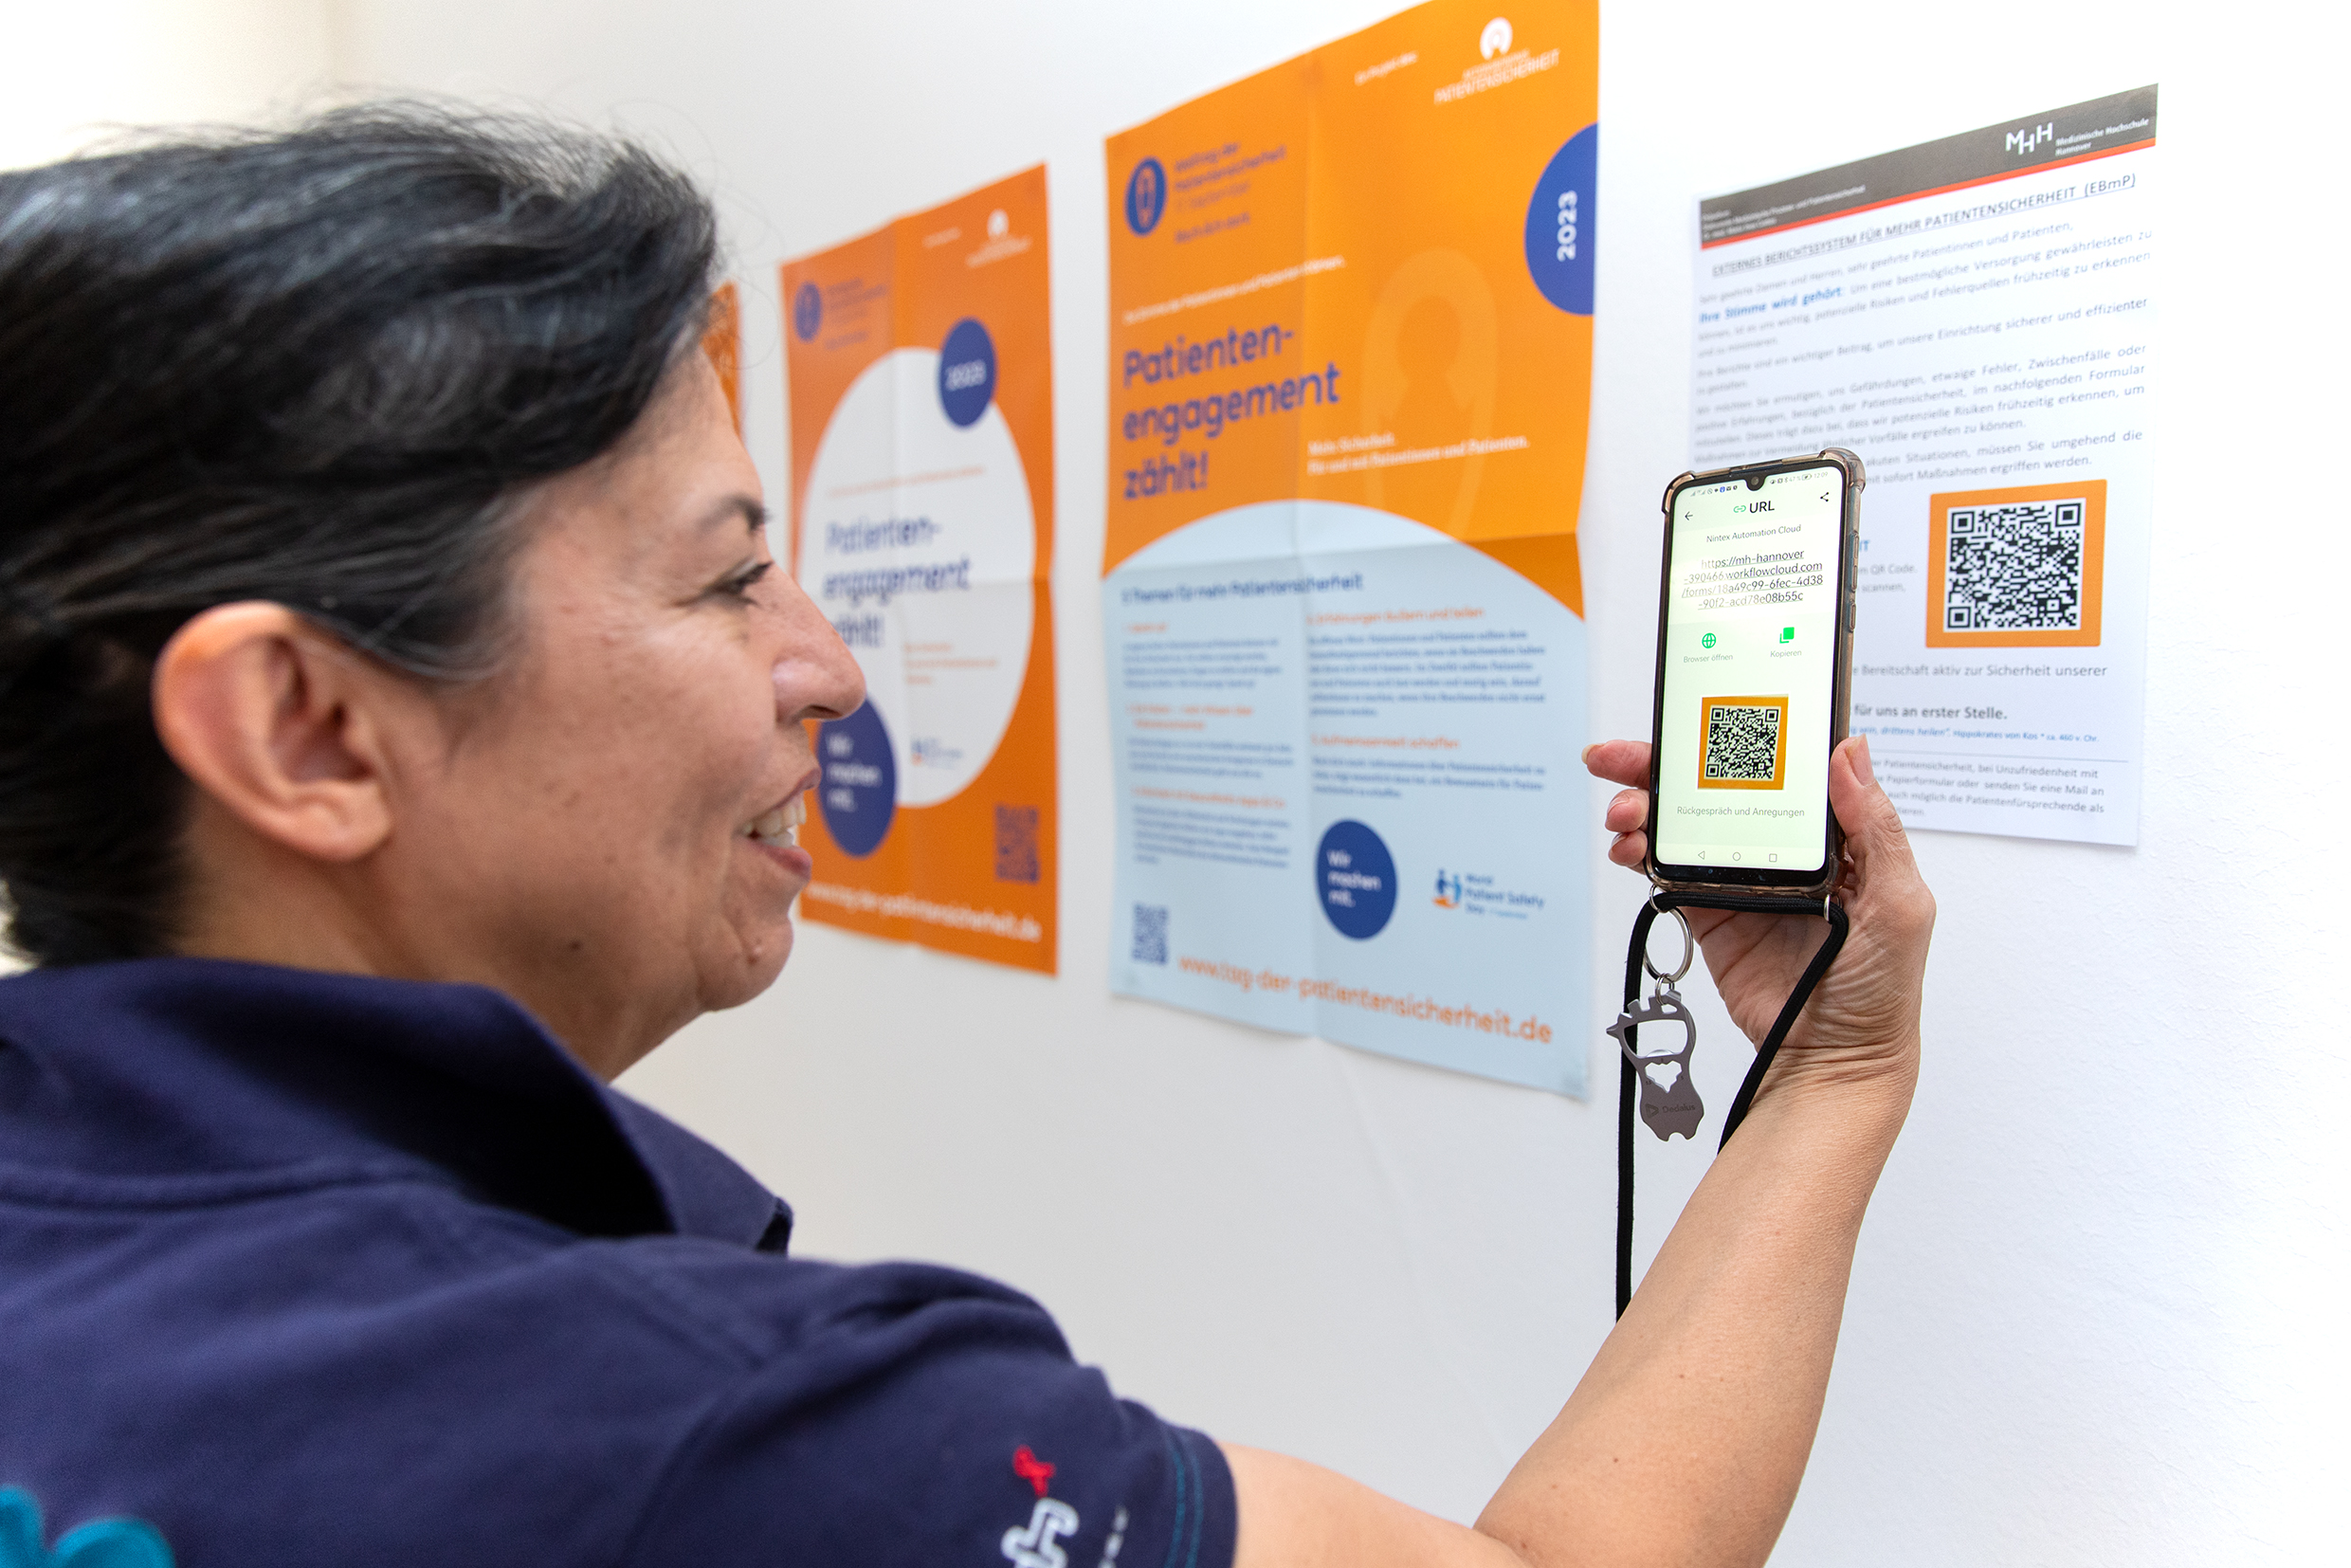 Dr. Maria Cartes stands in front of a poster, which shows the QR Code. She scans it with her smartphone.